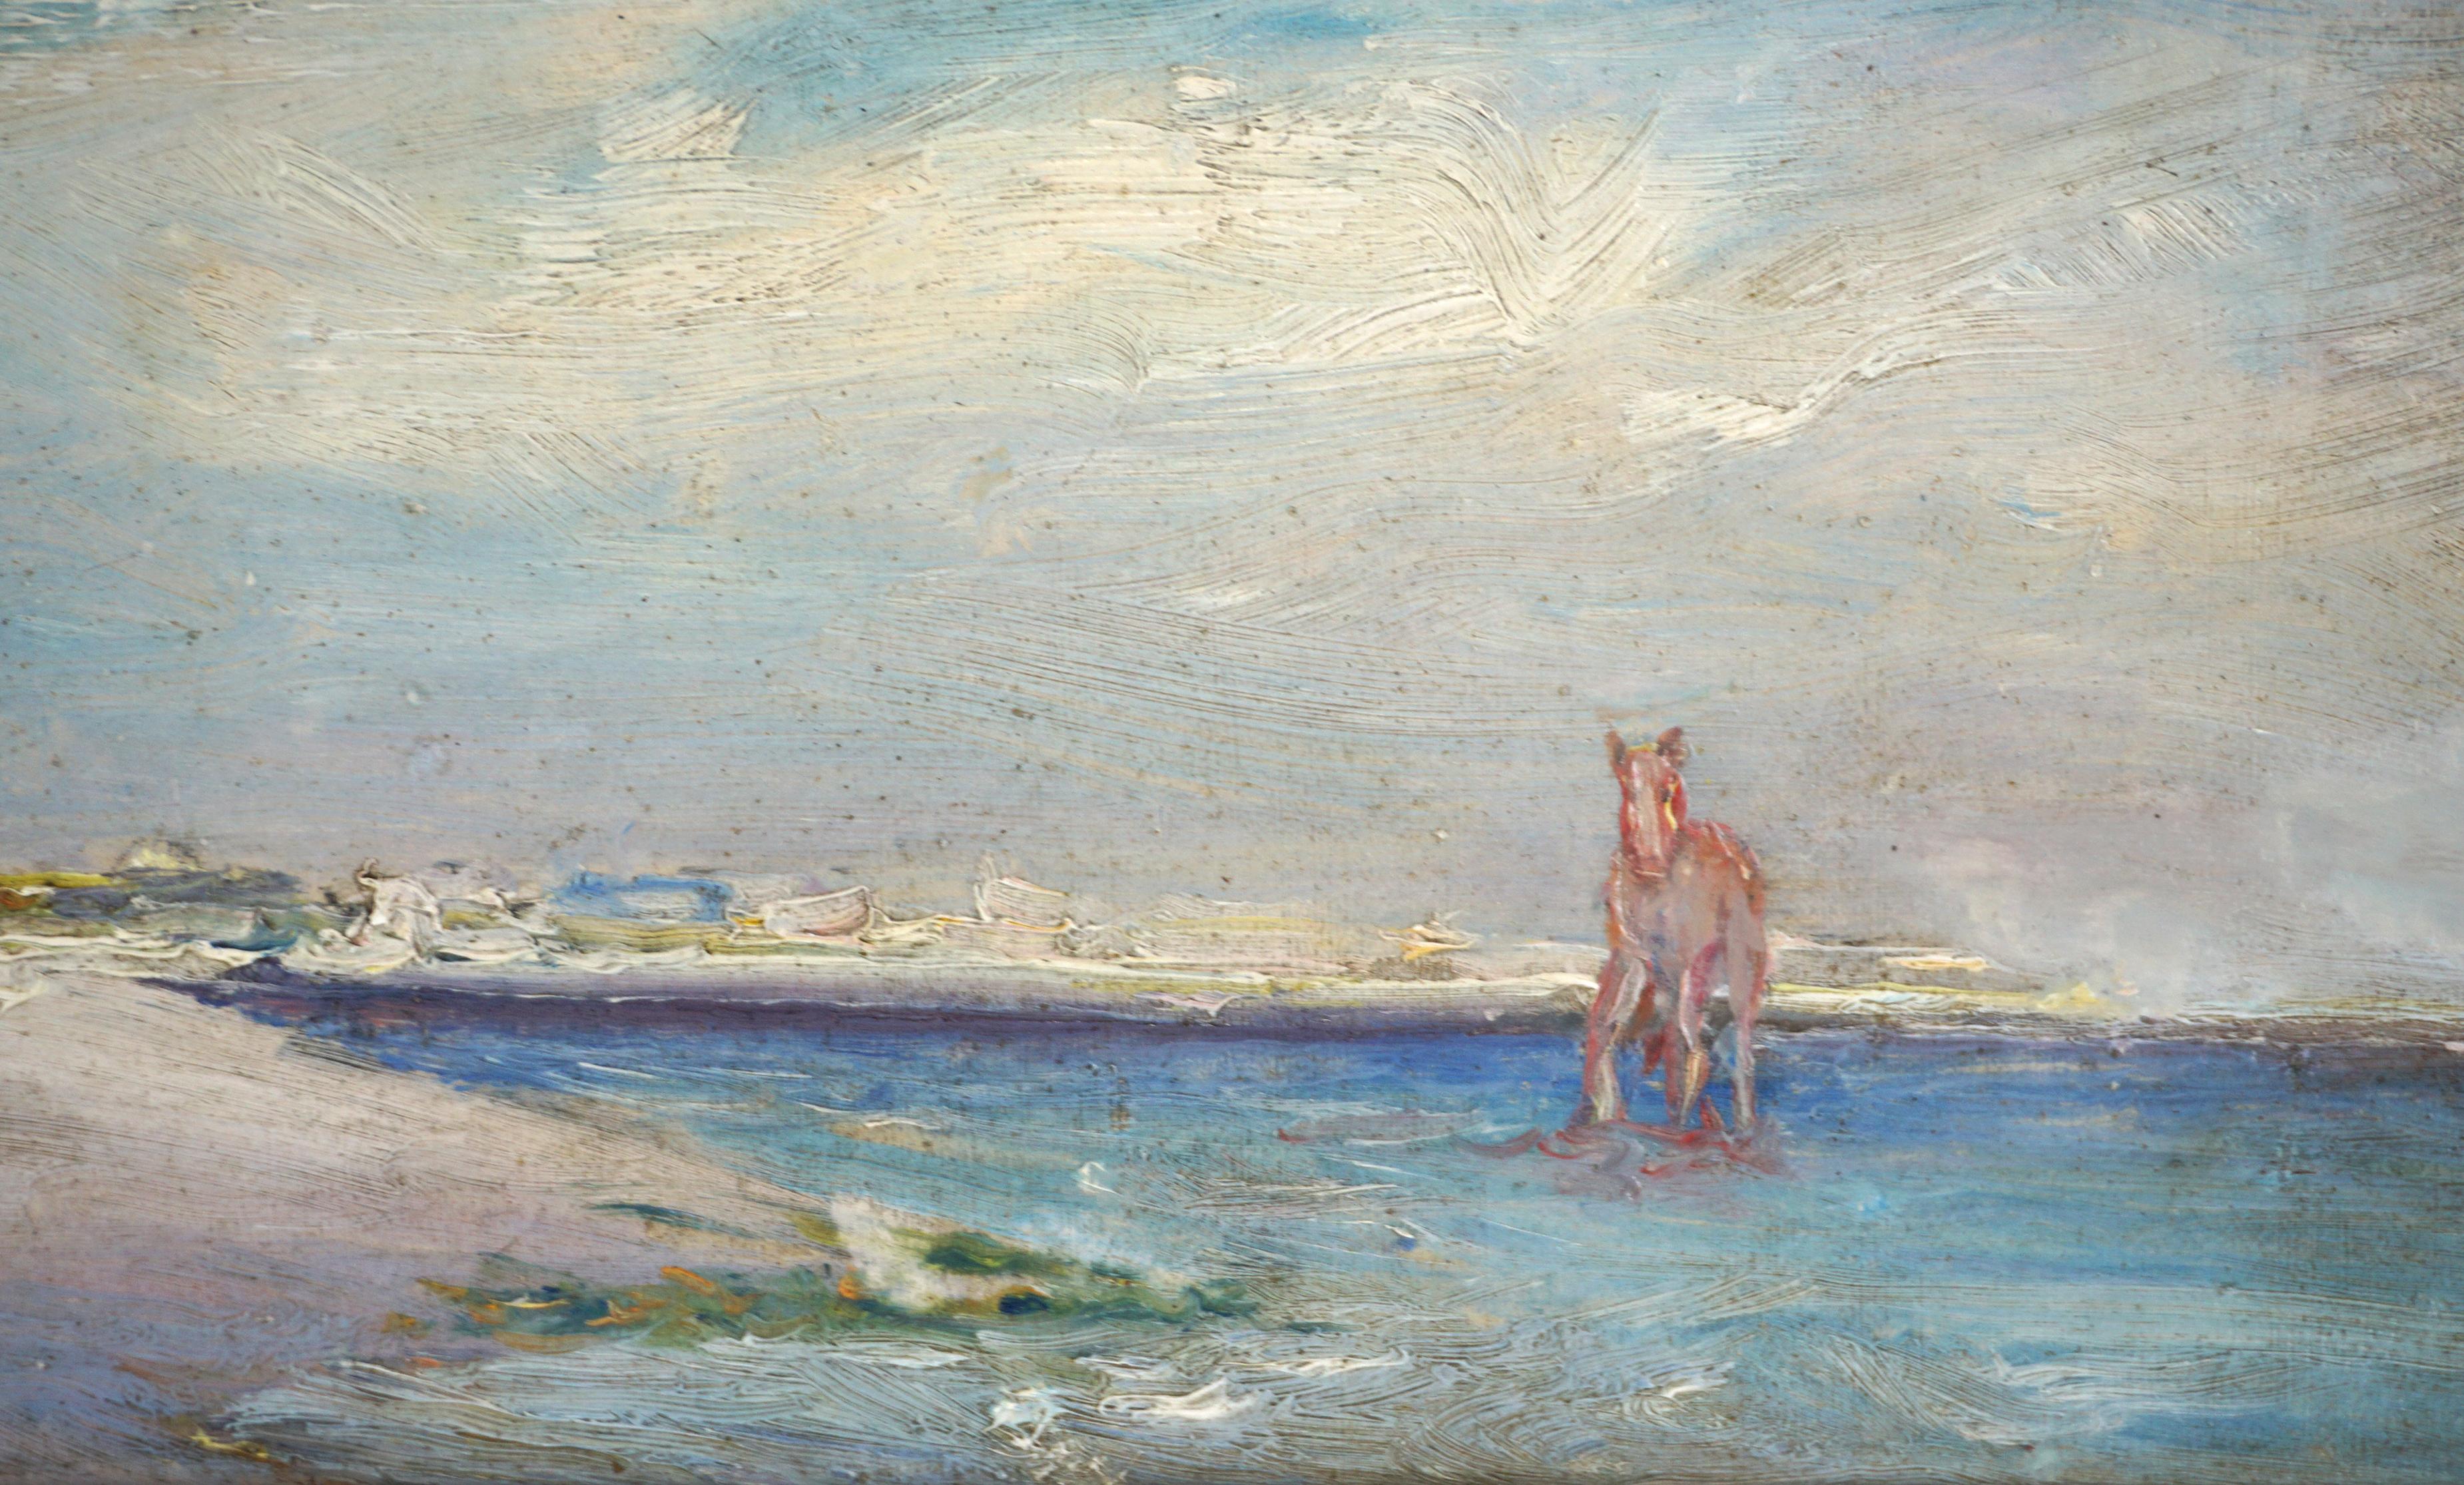 Early 20th Century Allegorical Figurative -- Pale Horse Coming to Shore - American Impressionist Painting by Cash Arthur Bond